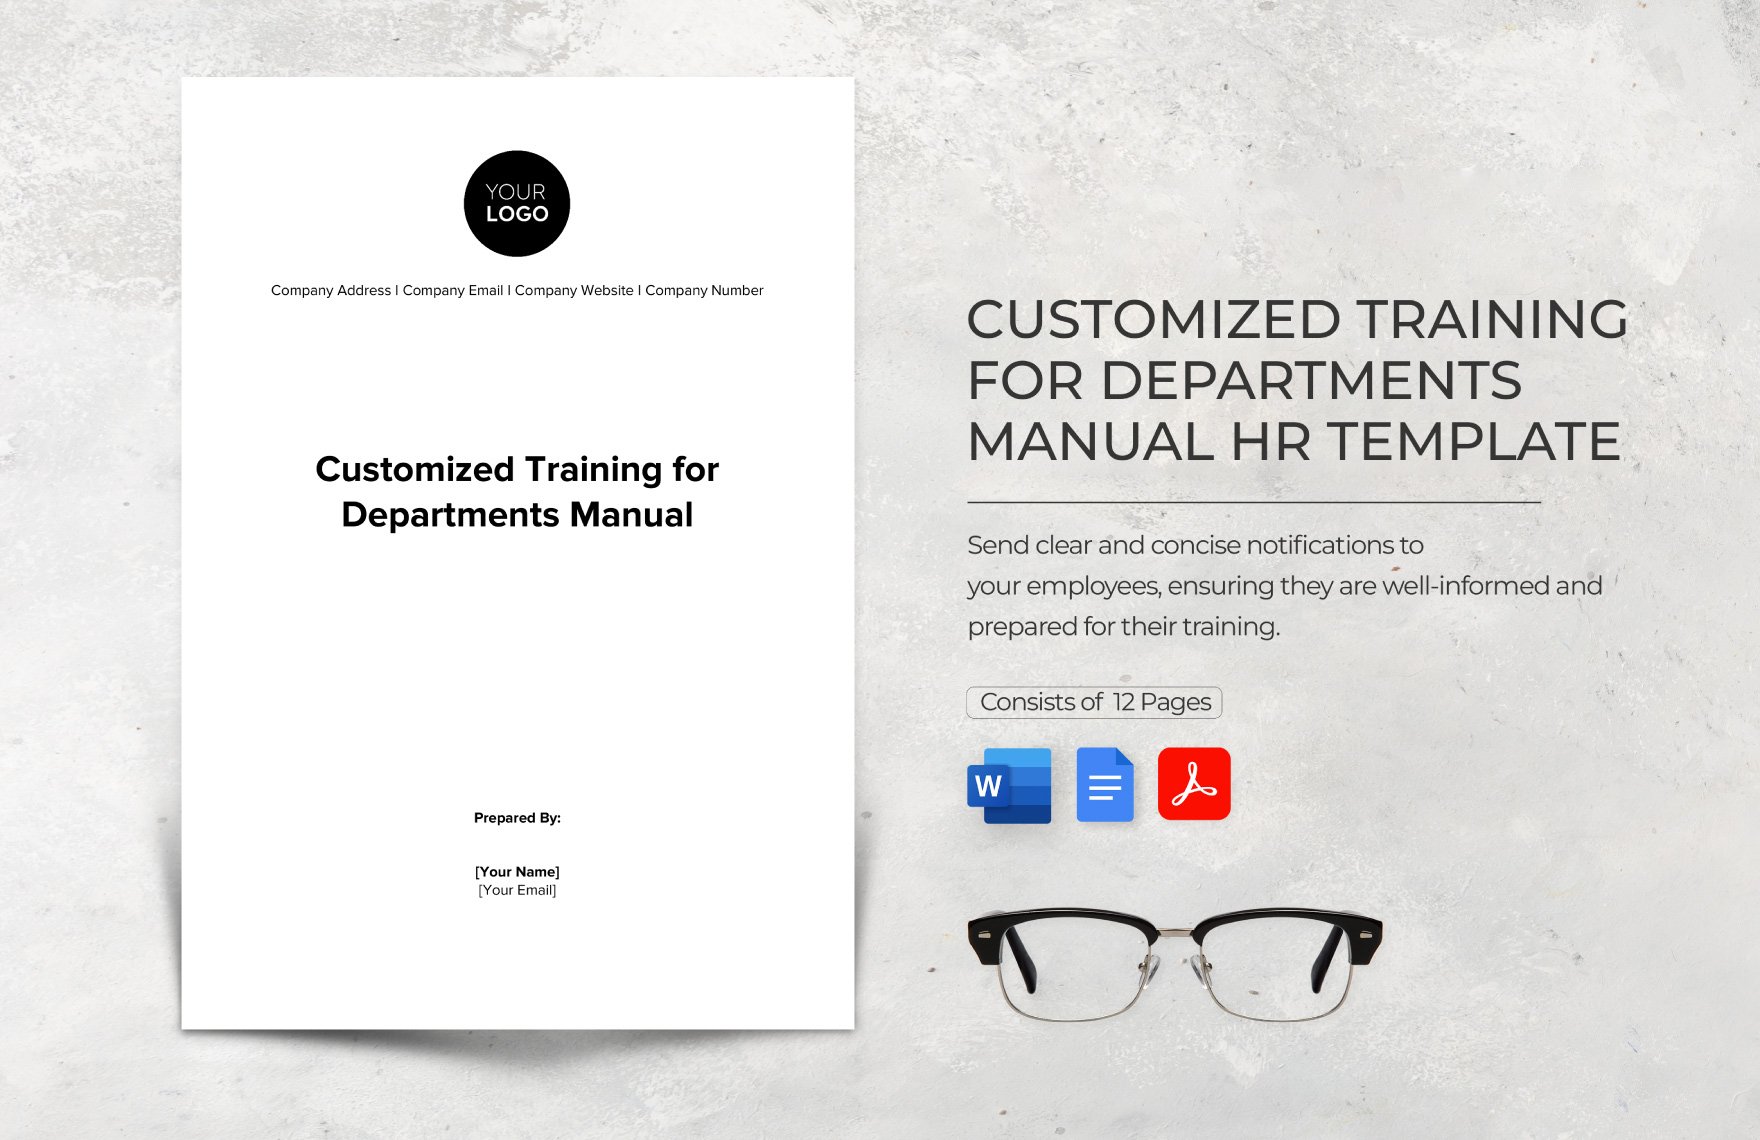 Customized Training for Departments Manual HR Template